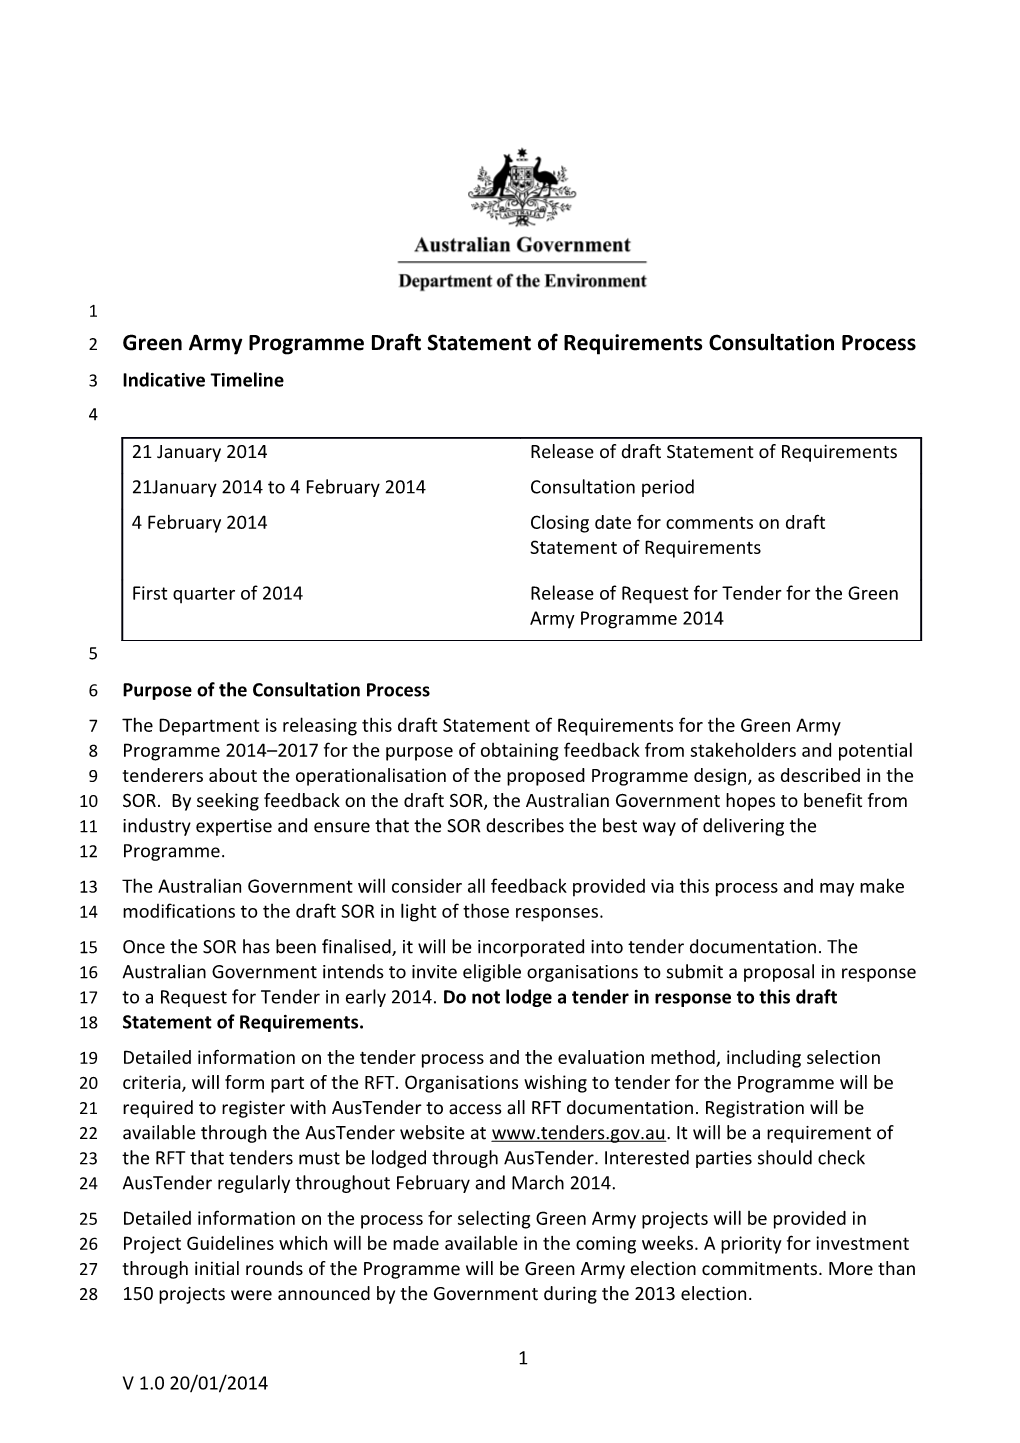 Green Army Programme Draft Statement of Requirements Consultation Process